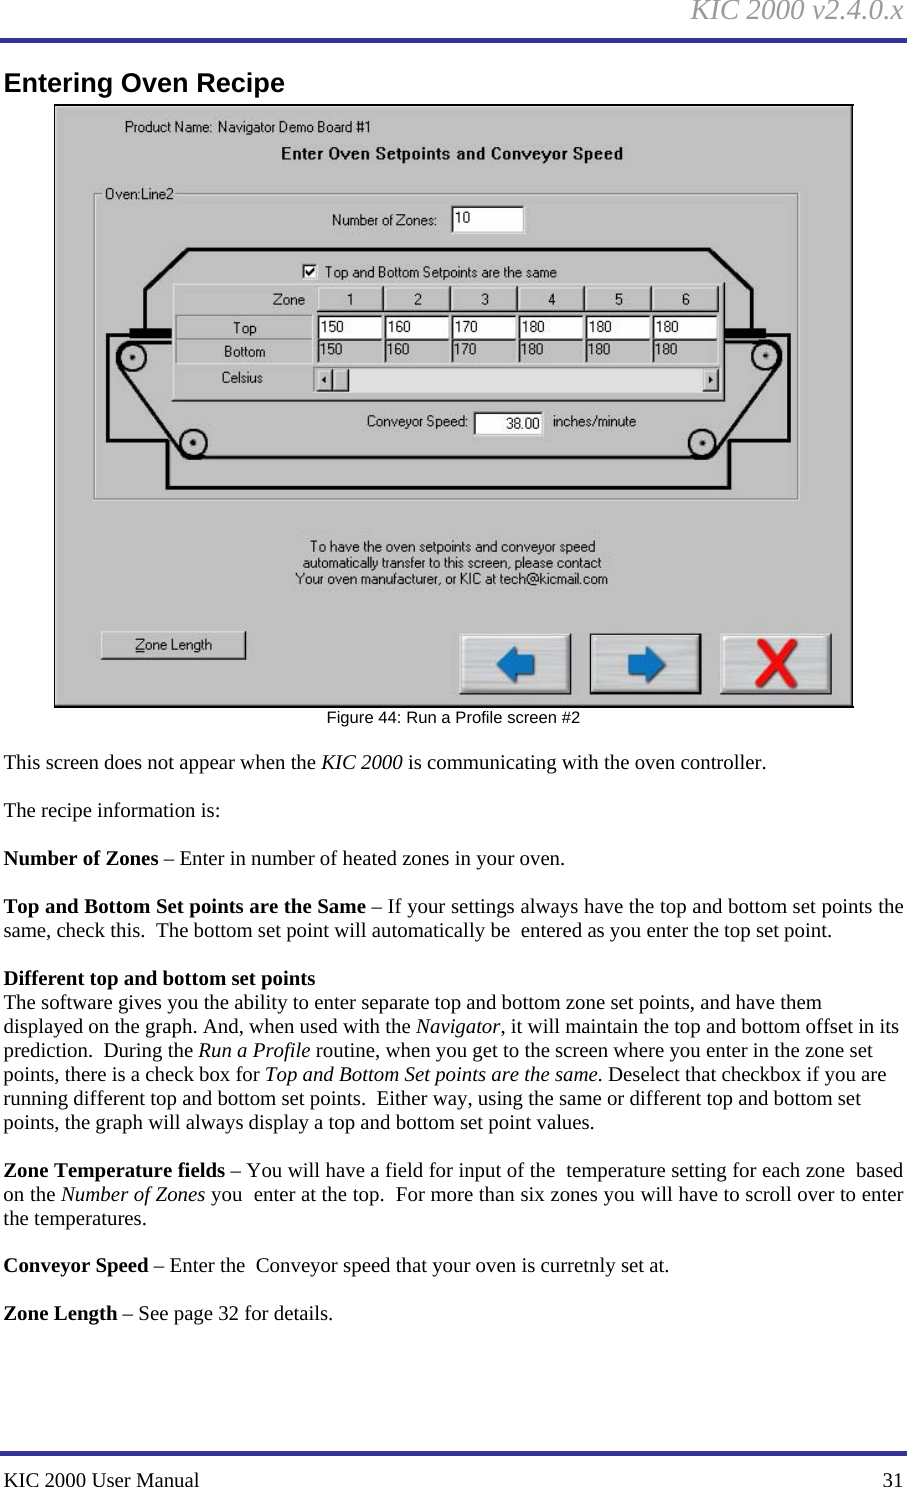 KIC 2000 v2.4.0.x KIC 2000 User Manual    31 Entering Oven Recipe  Figure 44: Run a Profile screen #2  This screen does not appear when the KIC 2000 is communicating with the oven controller.  The recipe information is:  Number of Zones – Enter in number of heated zones in your oven.  Top and Bottom Set points are the Same – If your settings always have the top and bottom set points the  same, check this.  The bottom set point will automatically be  entered as you enter the top set point.  Different top and bottom set points The software gives you the ability to enter separate top and bottom zone set points, and have them displayed on the graph. And, when used with the Navigator, it will maintain the top and bottom offset in its prediction.  During the Run a Profile routine, when you get to the screen where you enter in the zone set points, there is a check box for Top and Bottom Set points are the same. Deselect that checkbox if you are running different top and bottom set points.  Either way, using the same or different top and bottom set points, the graph will always display a top and bottom set point values.  Zone Temperature fields – You will have a field for input of the  temperature setting for each zone  based on the Number of Zones you  enter at the top.  For more than six zones you will have to scroll over to enter the temperatures.  Conveyor Speed – Enter the  Conveyor speed that your oven is curretnly set at.  Zone Length – See page 32 for details.   